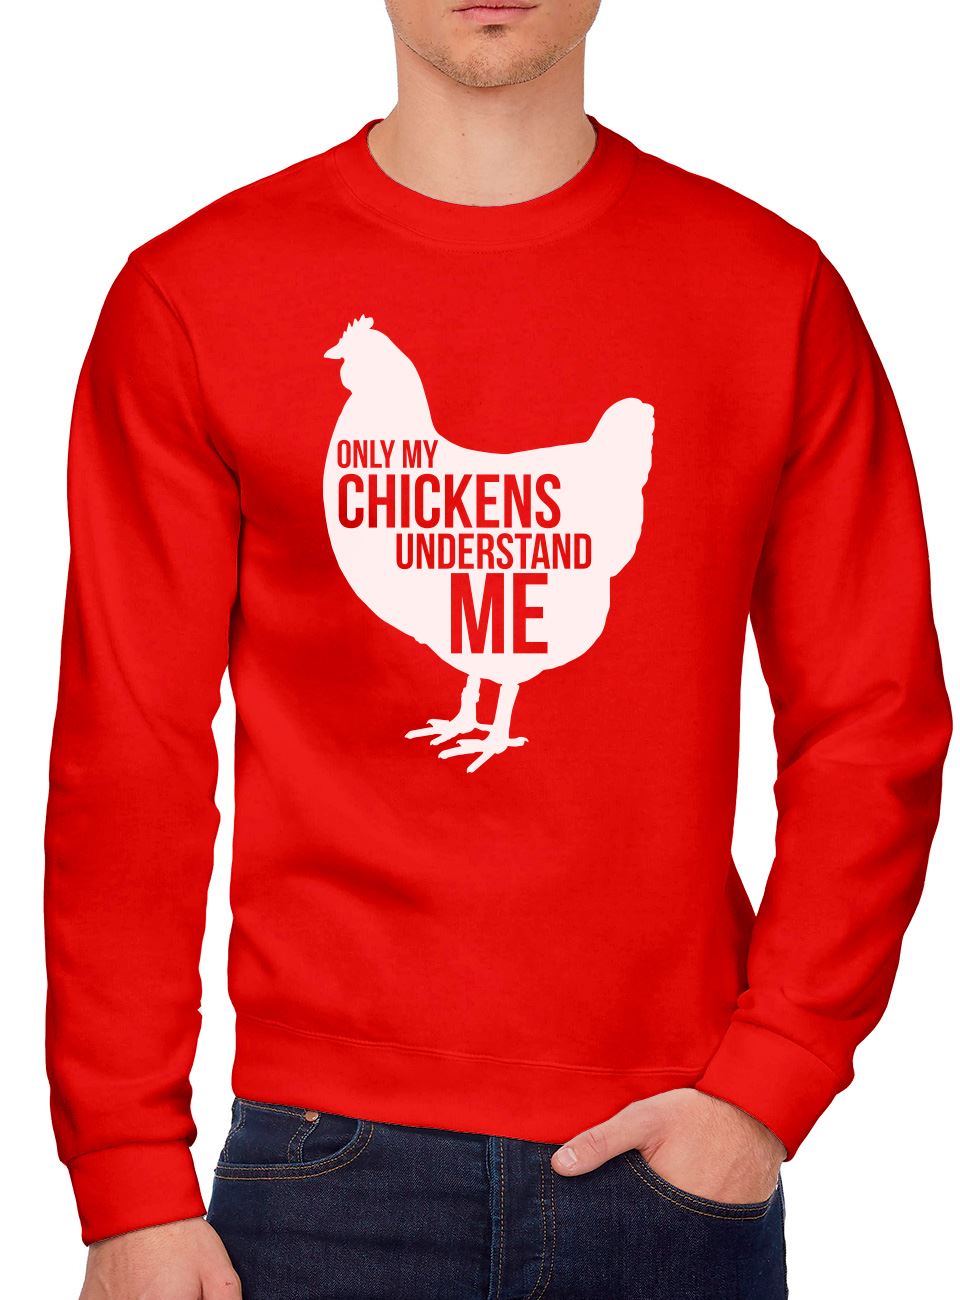 Only My Chickens Understand Me - Youth & Mens Sweatshirt